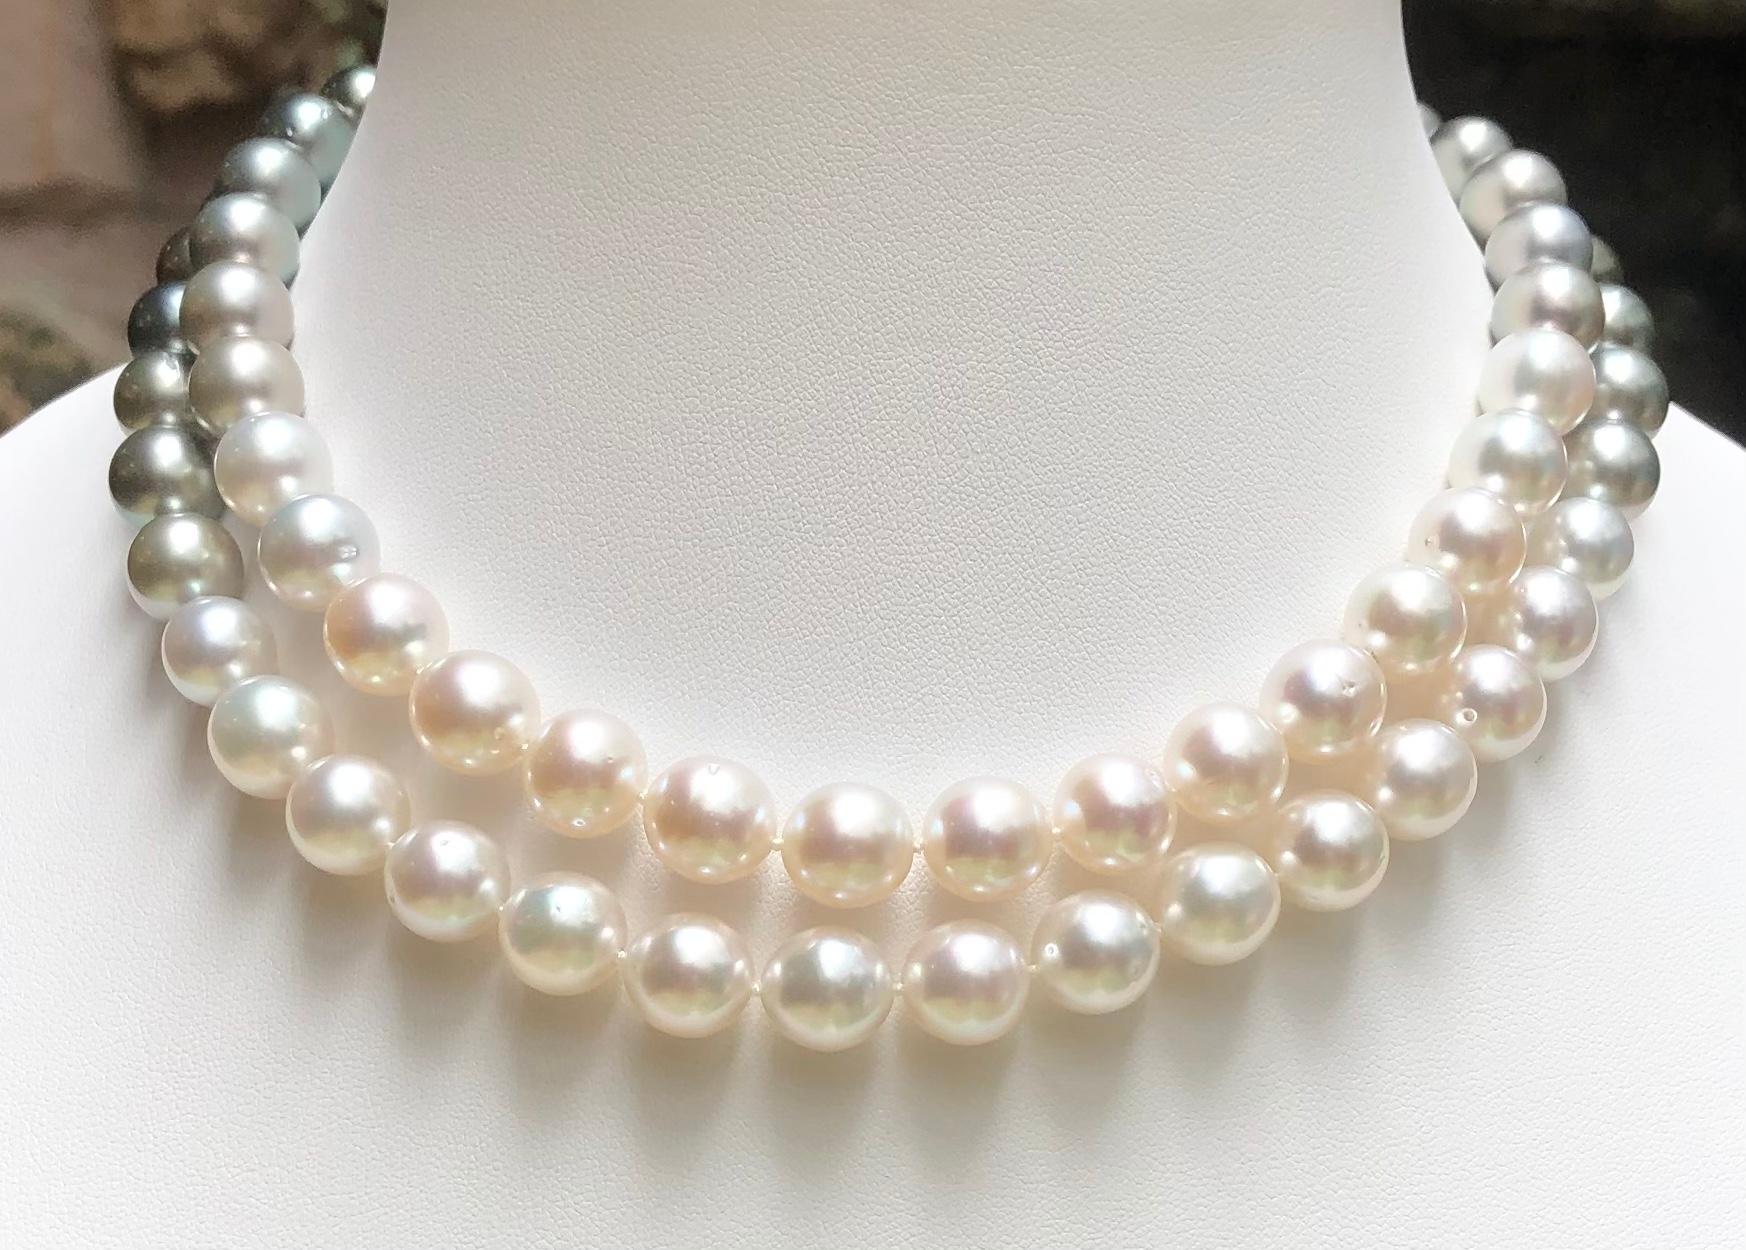 Uncut Gradutated Color South Sea Pearl Necklace with Hidden 18K White Gold Clasp For Sale